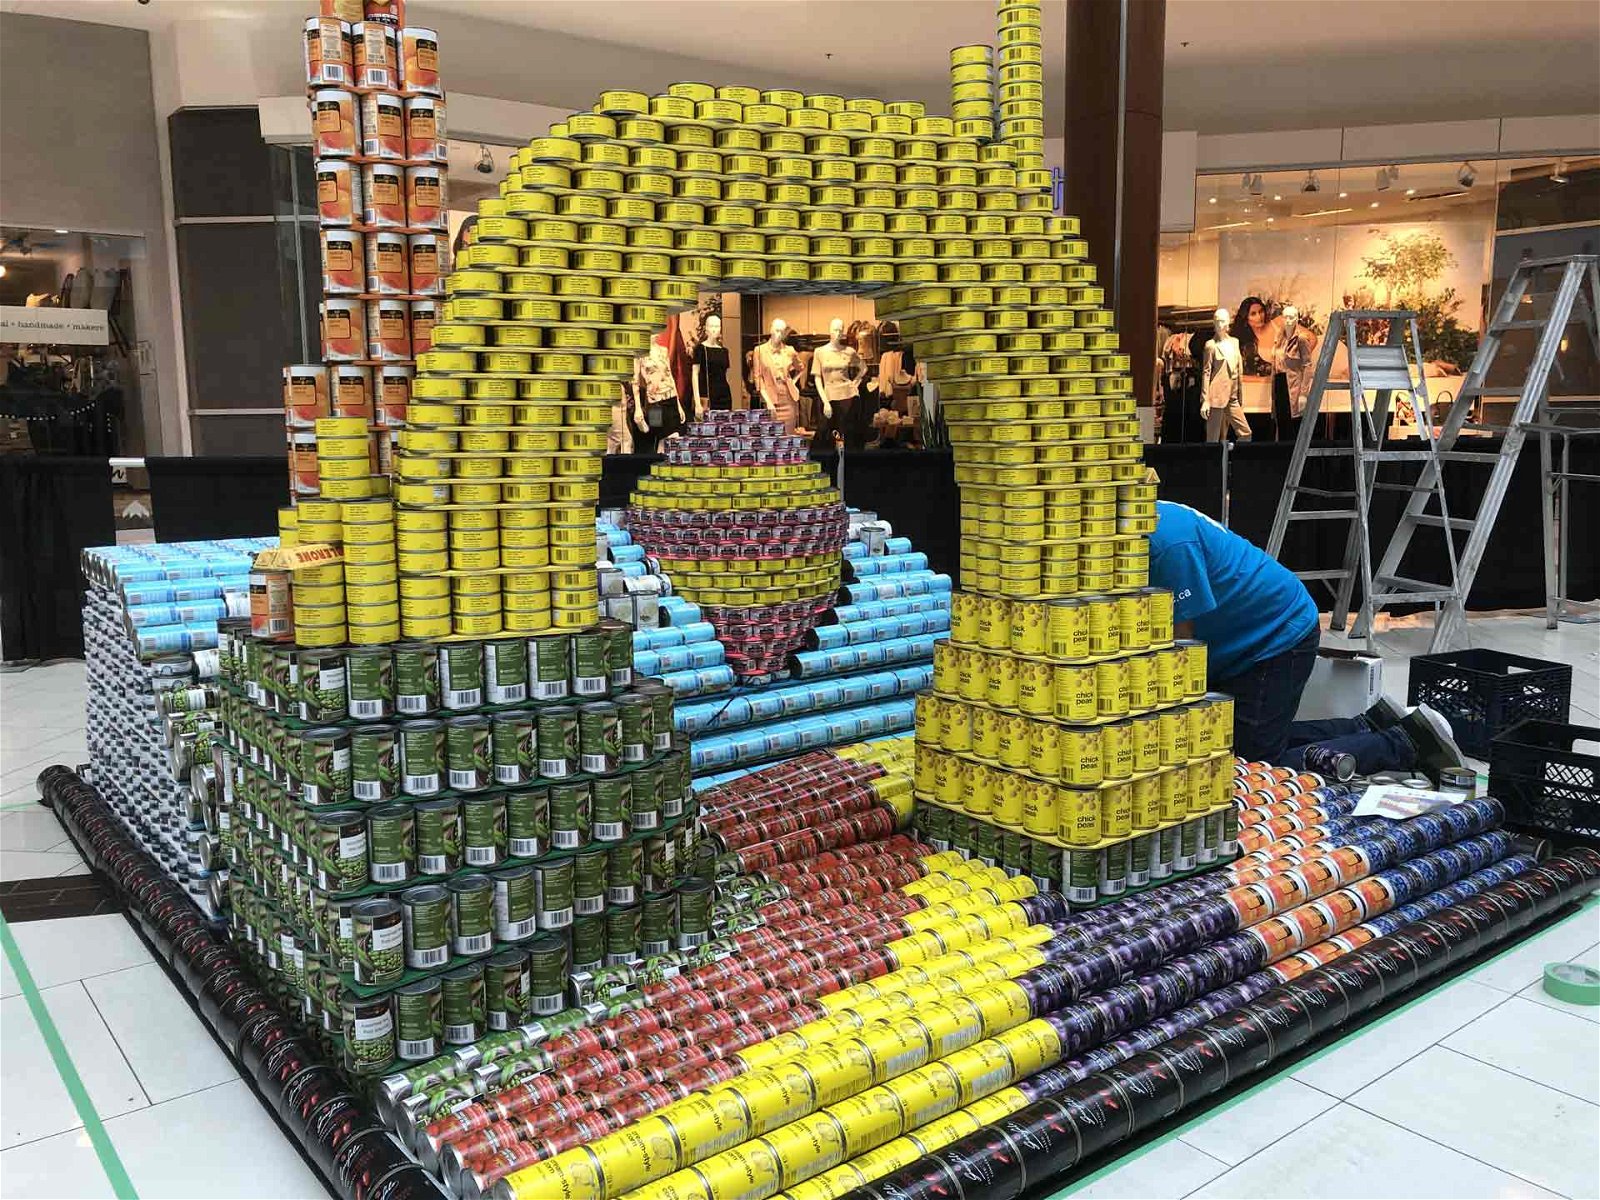 Rjc Community Canstruction CAL 8